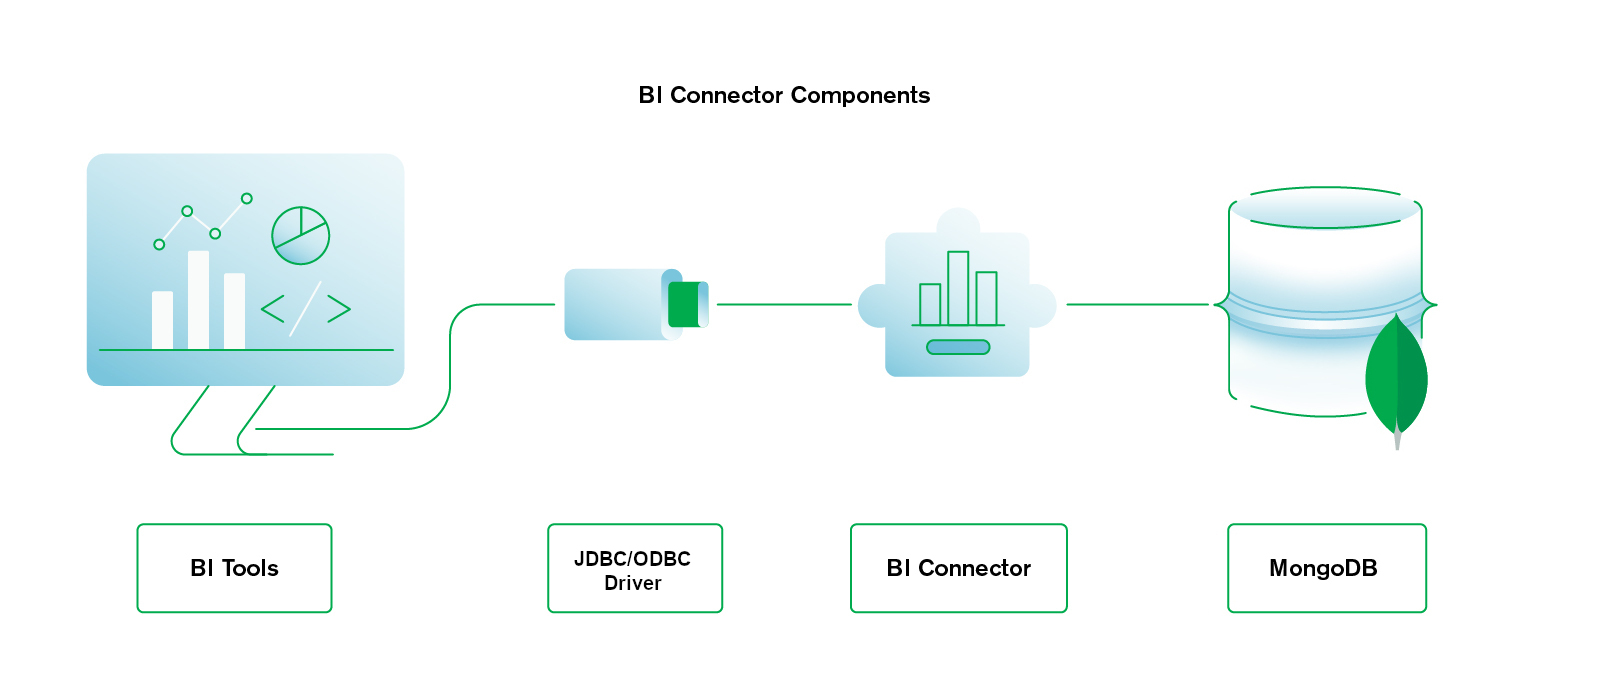 Diagram showing that the DSN connects to the BI Connector.